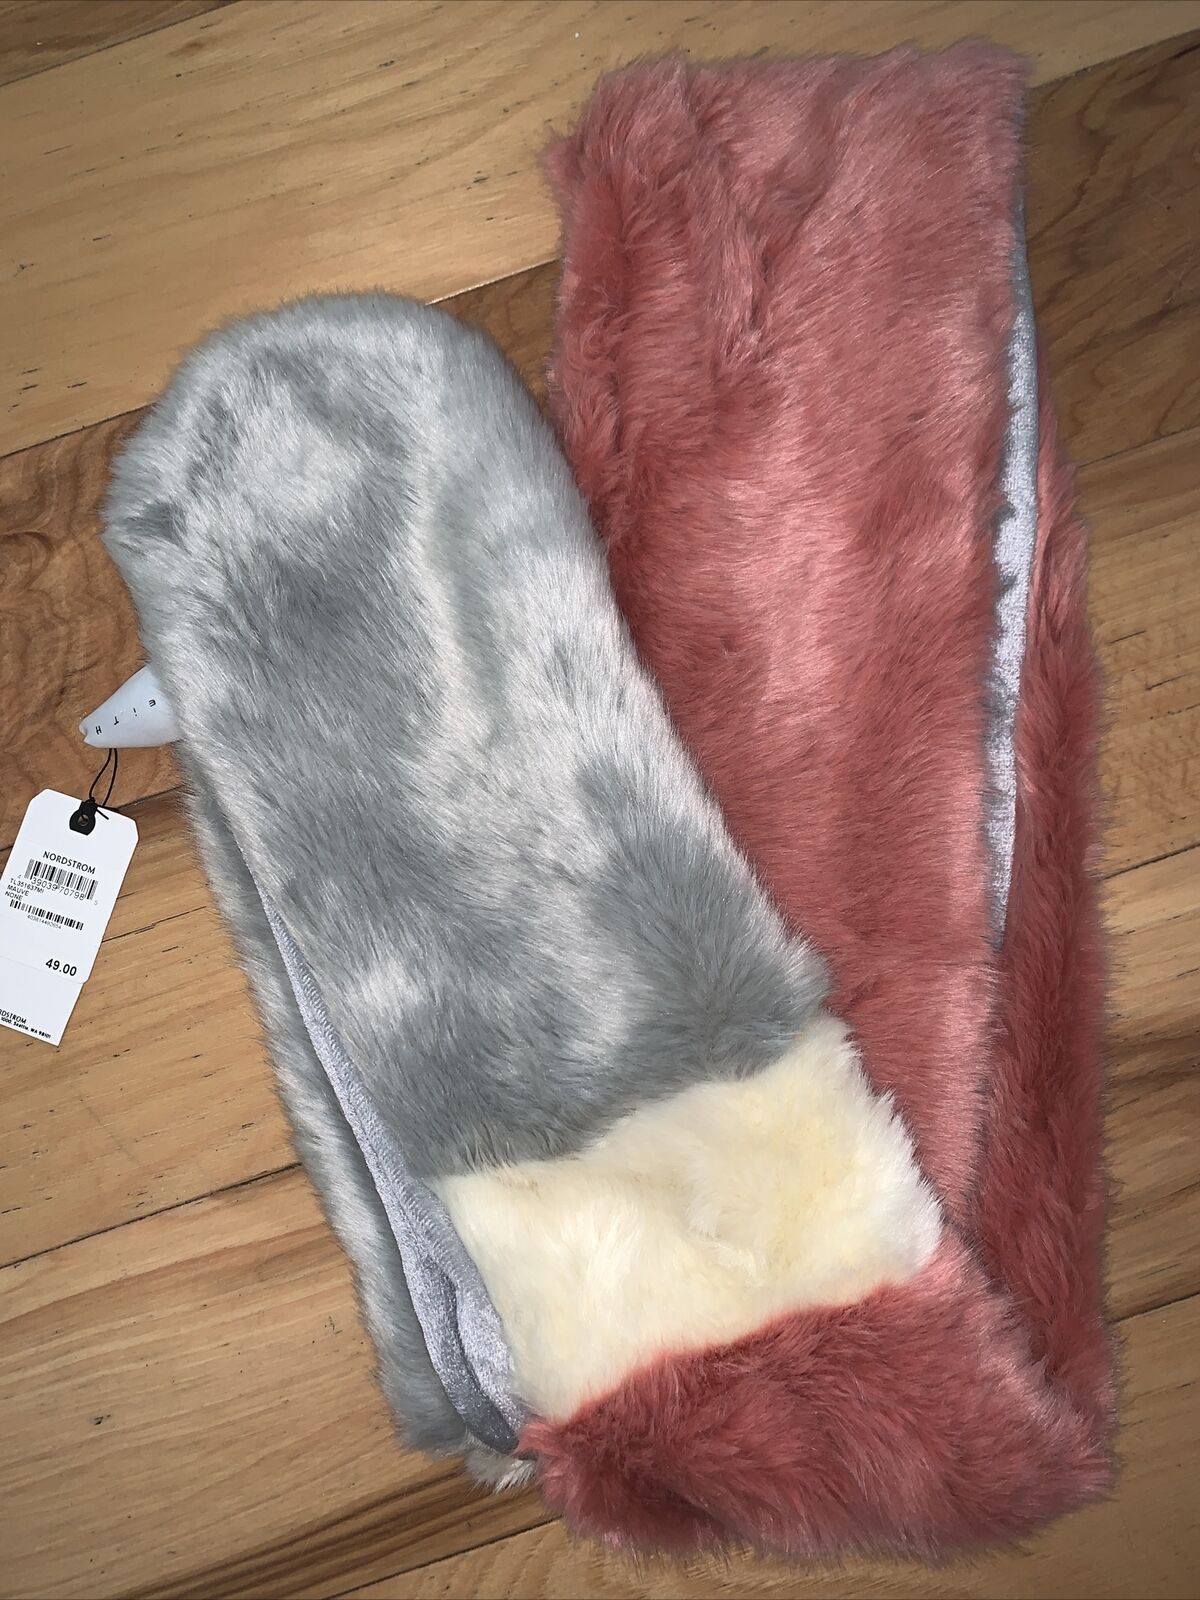 NWT Leith gray white pink faux fur scarf with clasp 5.5” W X 62” L MSRP $49